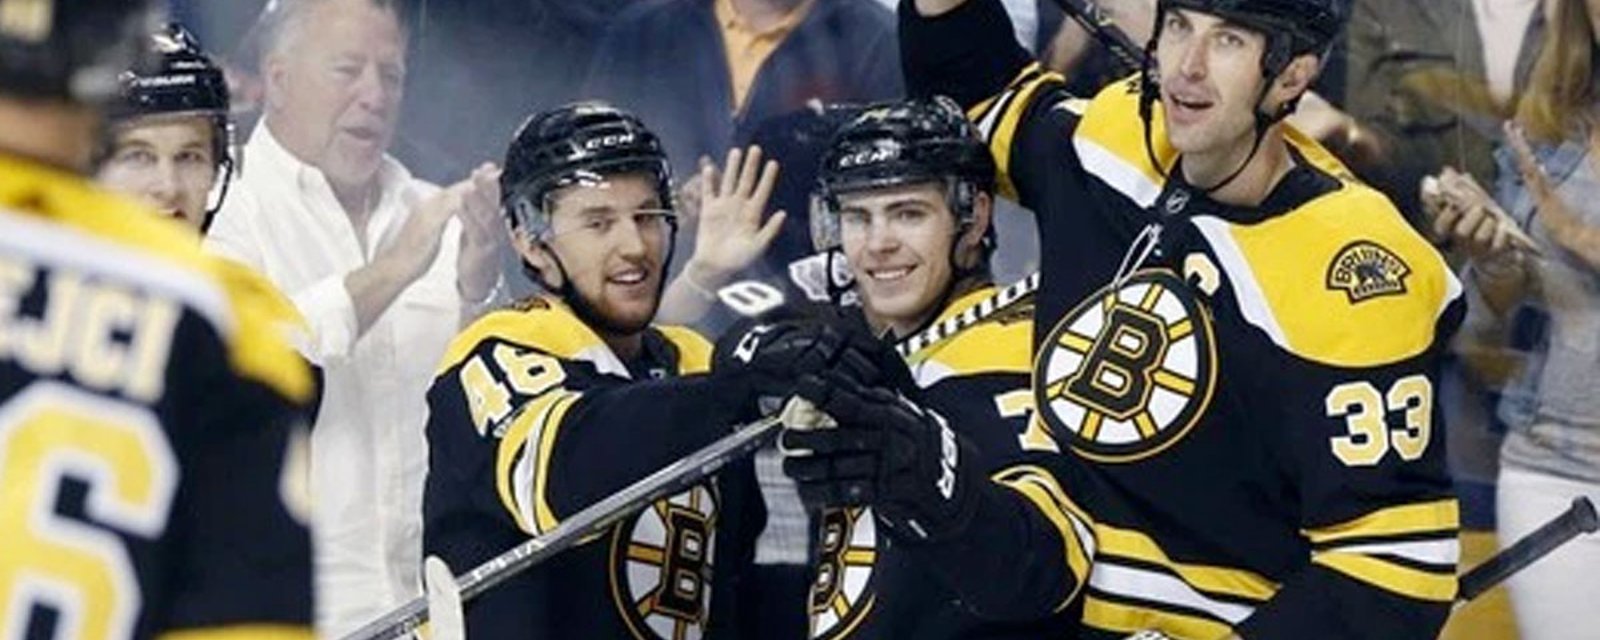 Some encouraging news coming out of Bruins’ practice today! 